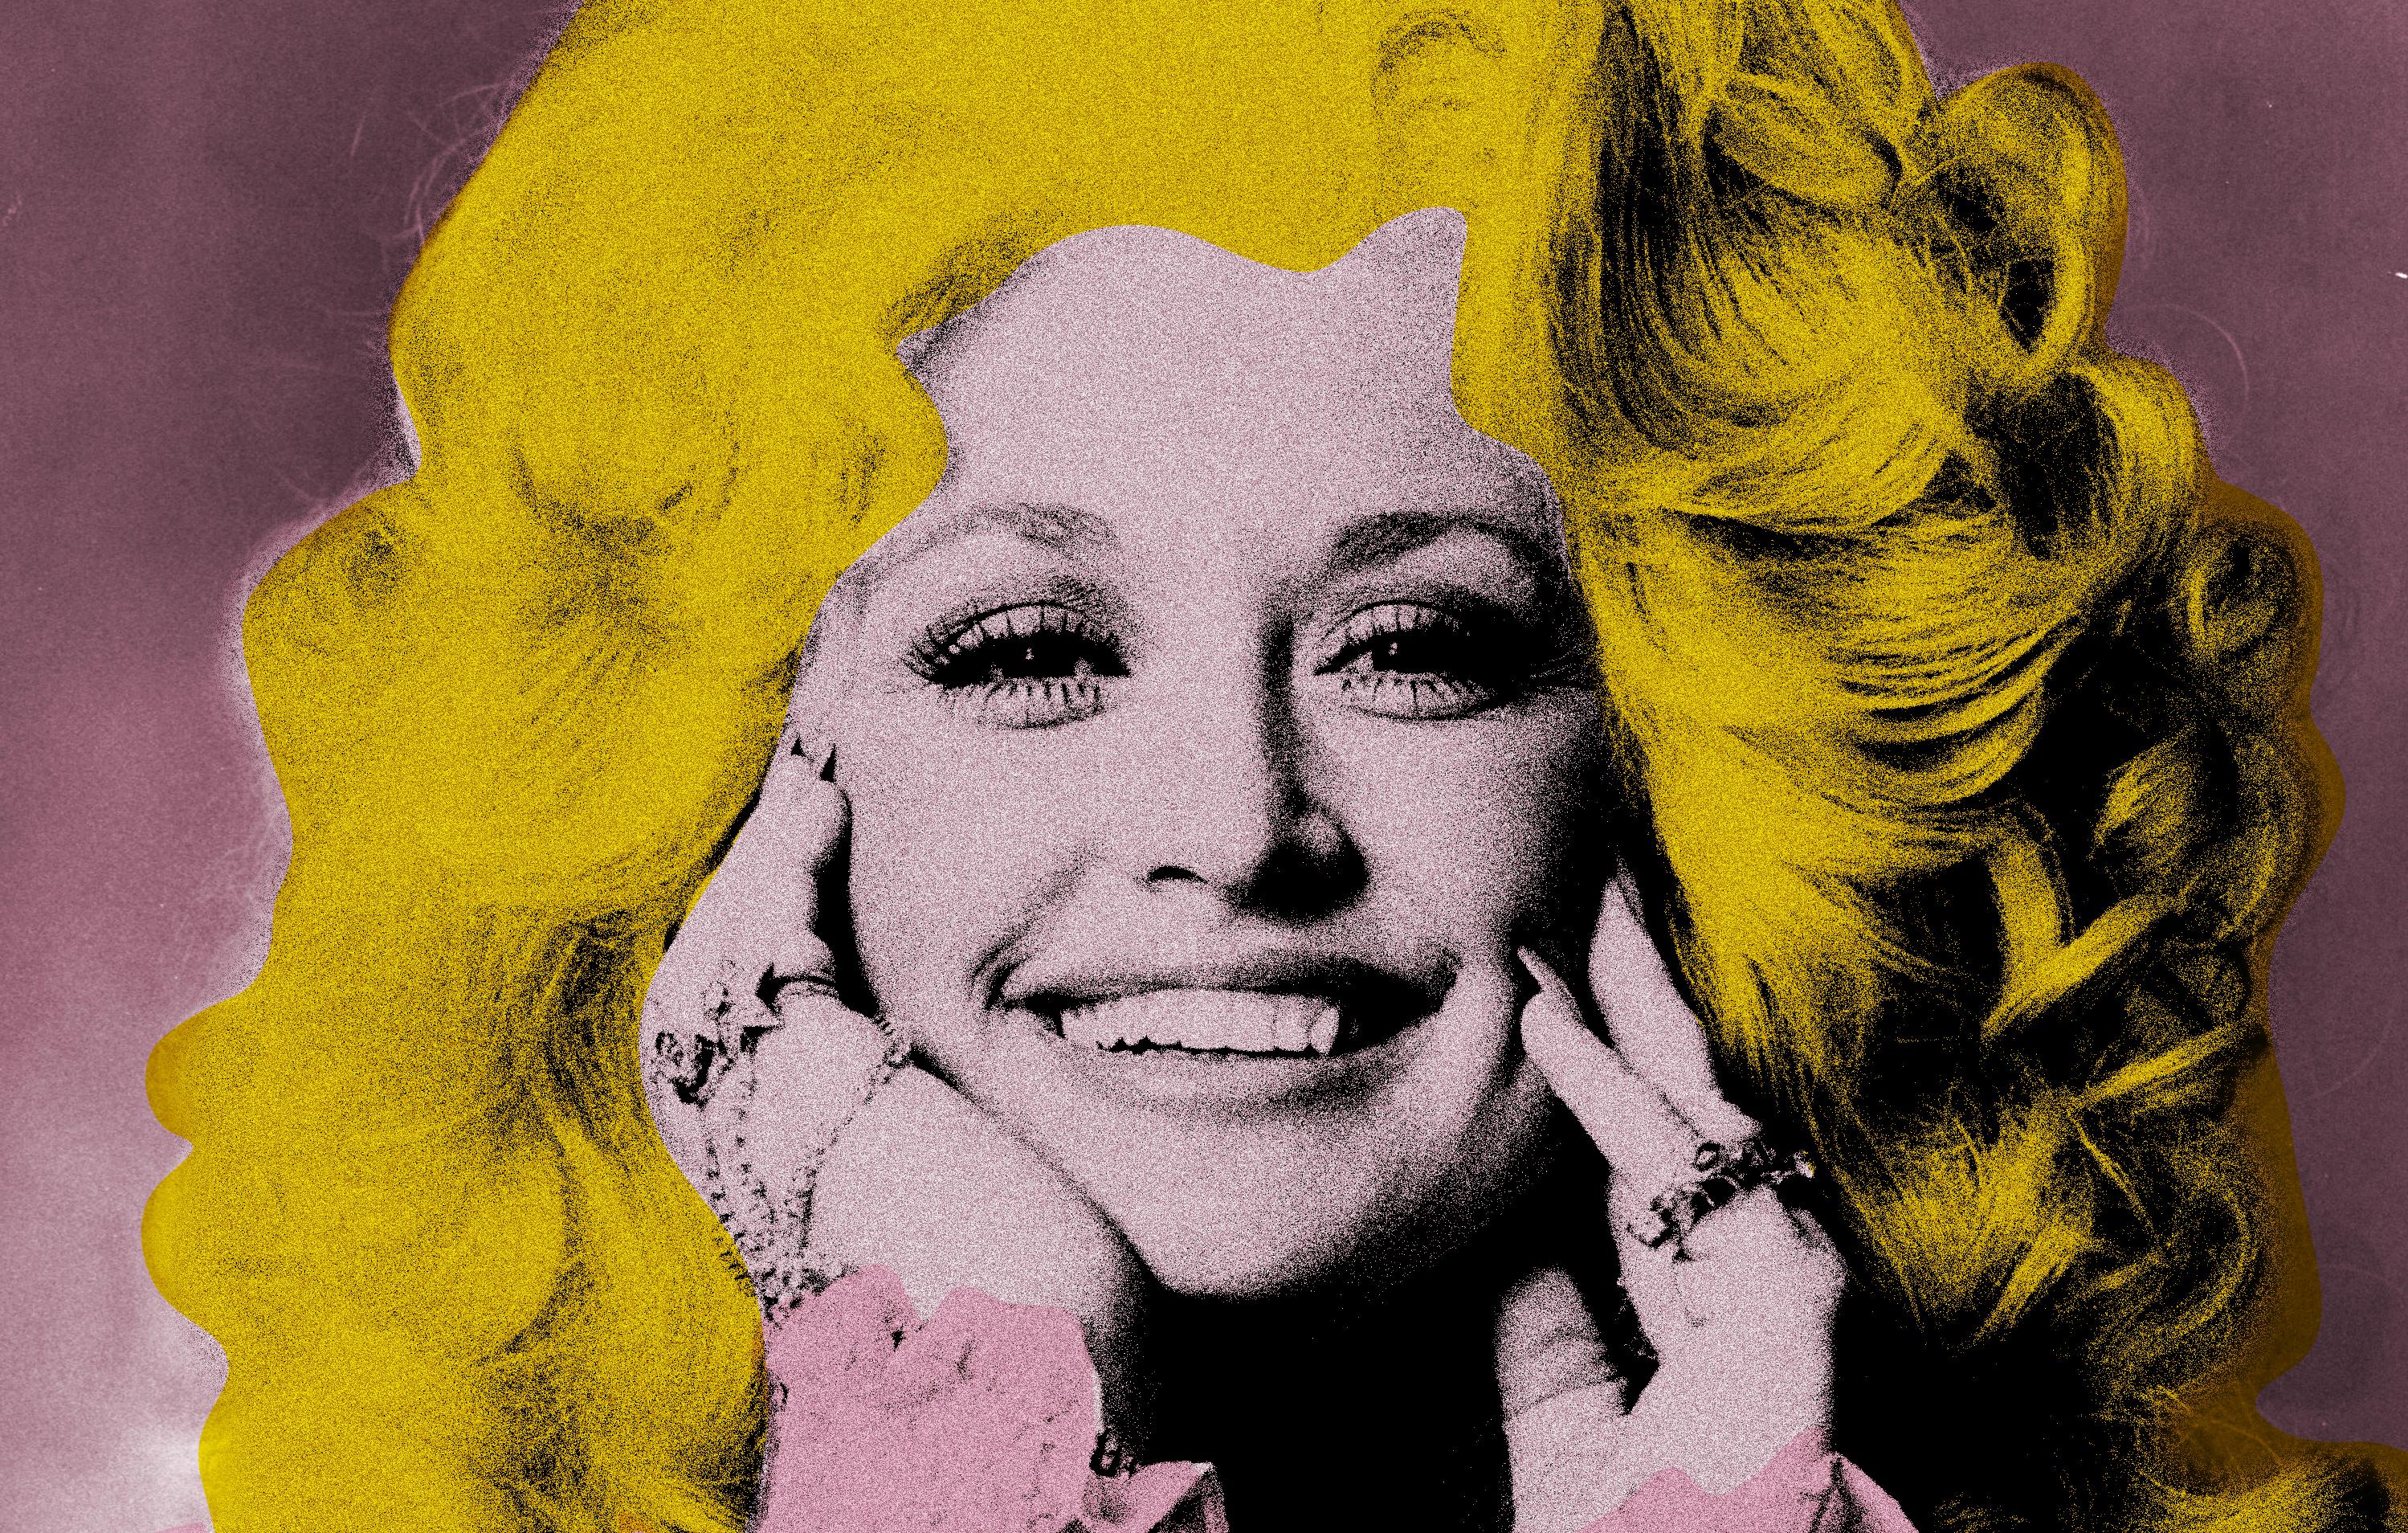                 **ANNUAL SUPER SALER UNTIL MAY 15TH**
*These Prices Won't Be Repeated Again this Year-Take Advantage of it*

Celebrating the one and only Dolly Parton. This piece captures the glamorous life she is having and sharing with the